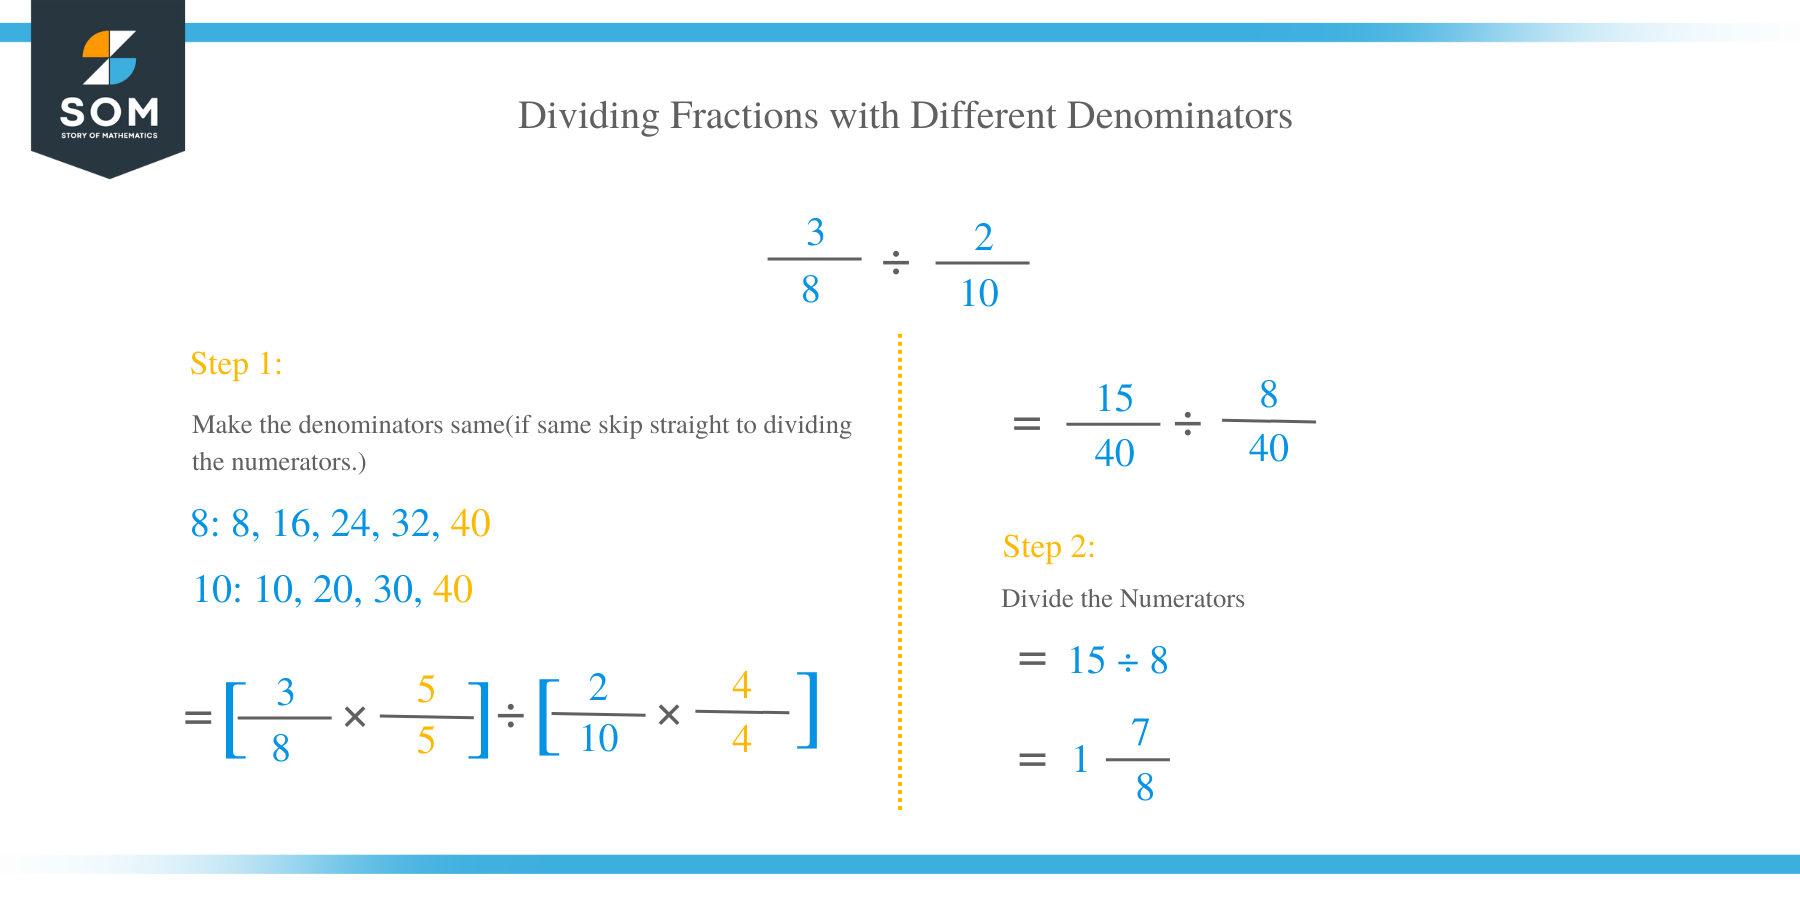 Dividing Fractions with Different Denominators